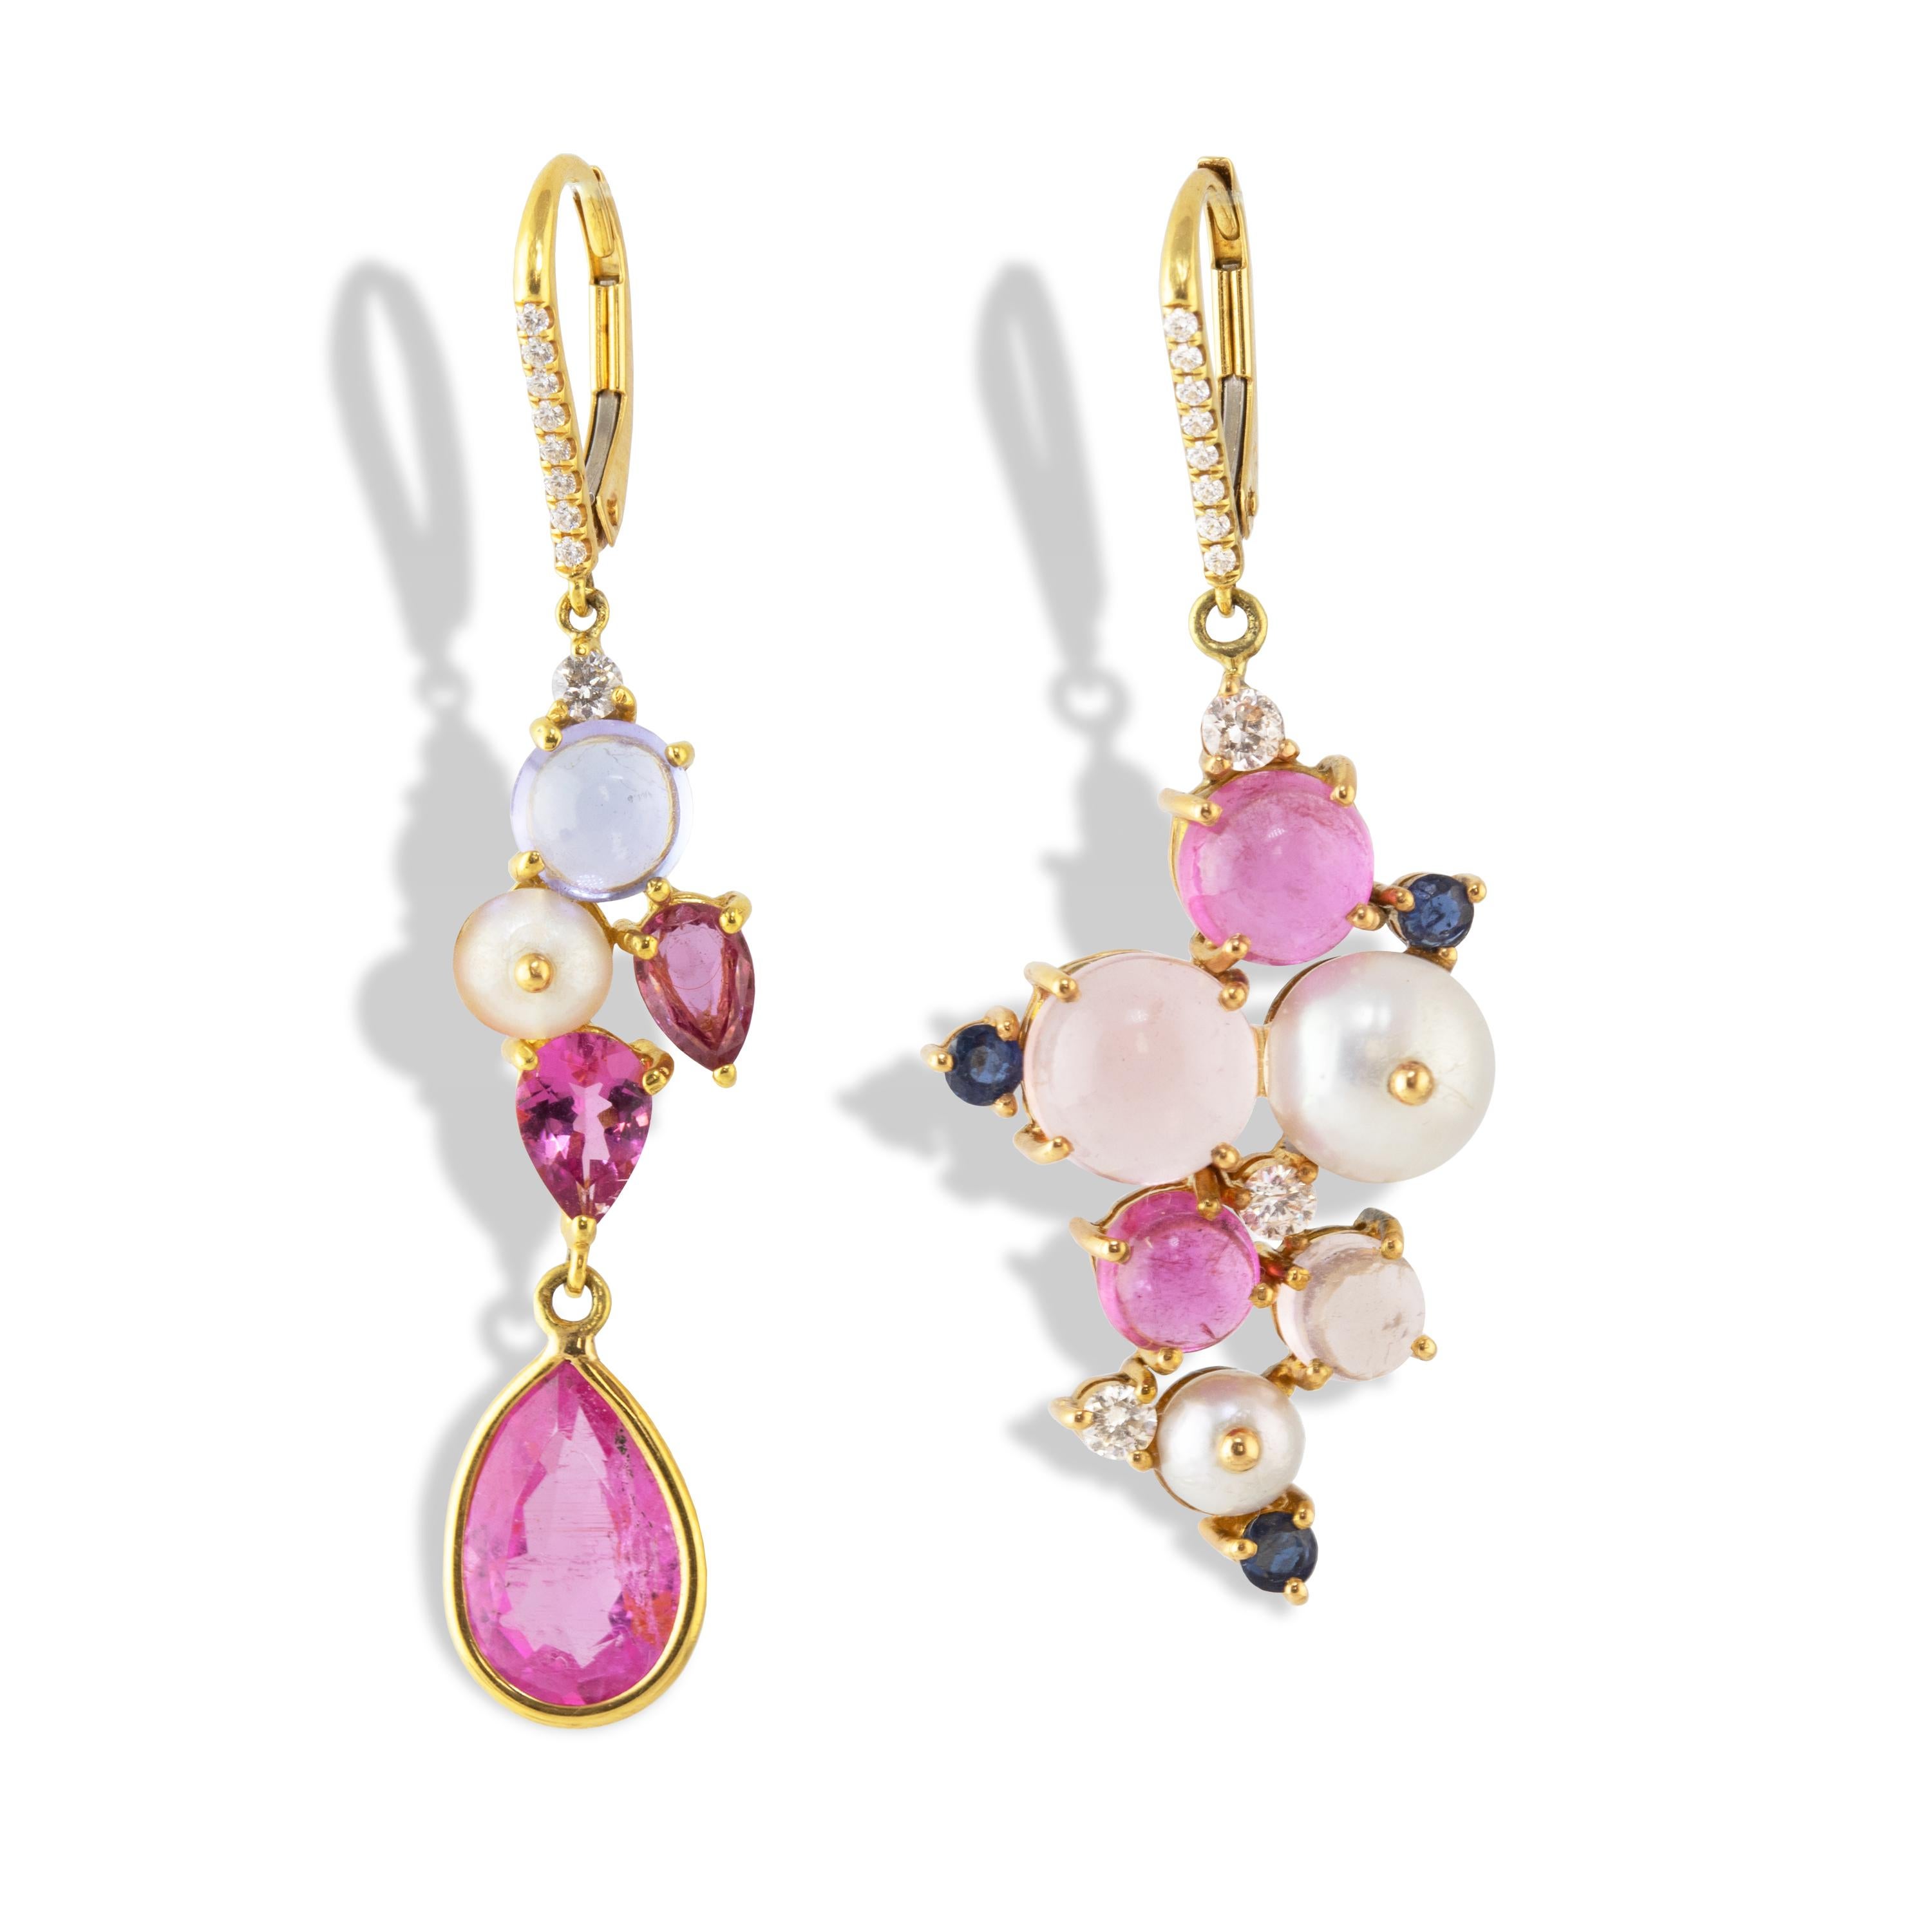 A pair of asymmetrical cluster earrings featuring Pink tourmaline, Tanzanite, Diamonds, Sapphires and Pearls and set in 18k gold. 

One earring features a 3.08 carat Pink tourmaline pear drop hangs from a cluster which includes 2 smaller faceted